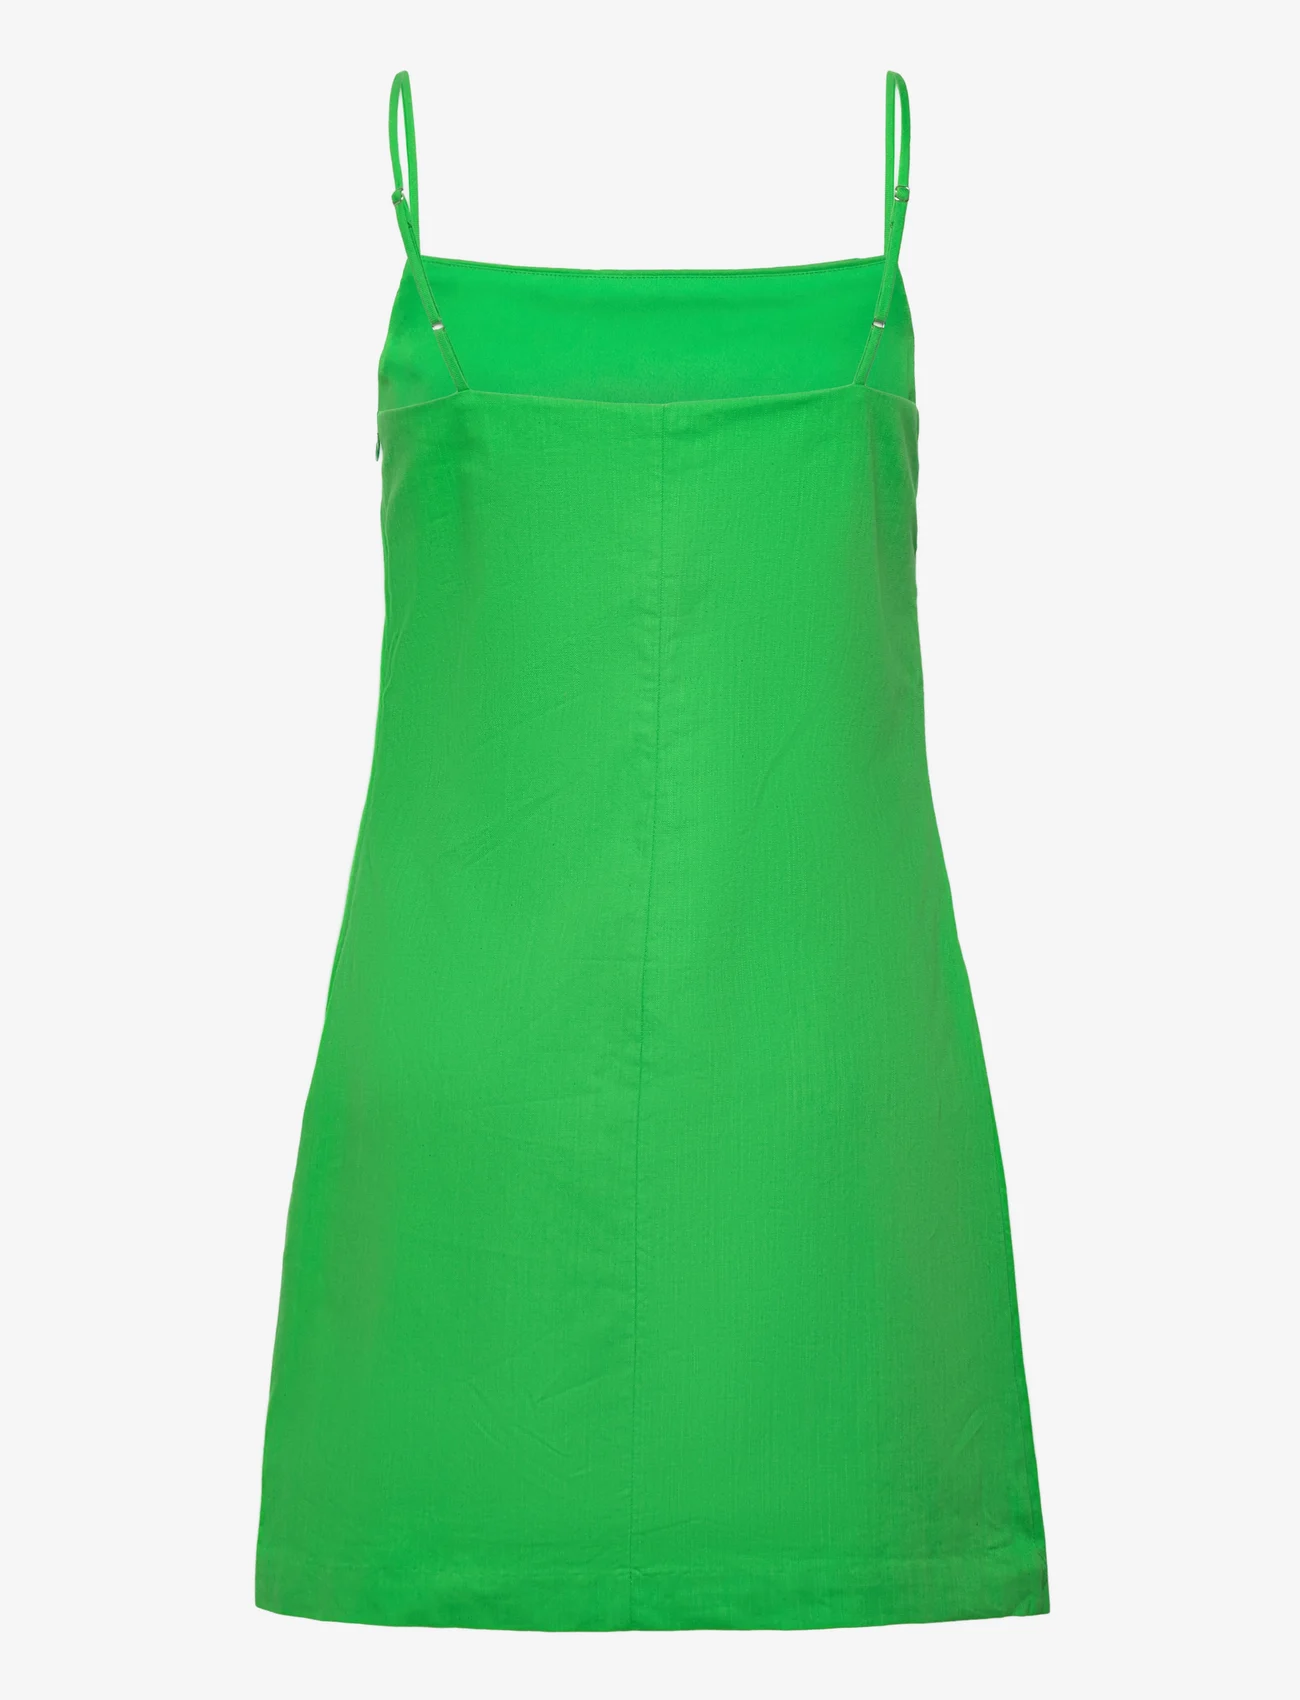 Modström - CydneyMD dress - party wear at outlet prices - classic green - 1